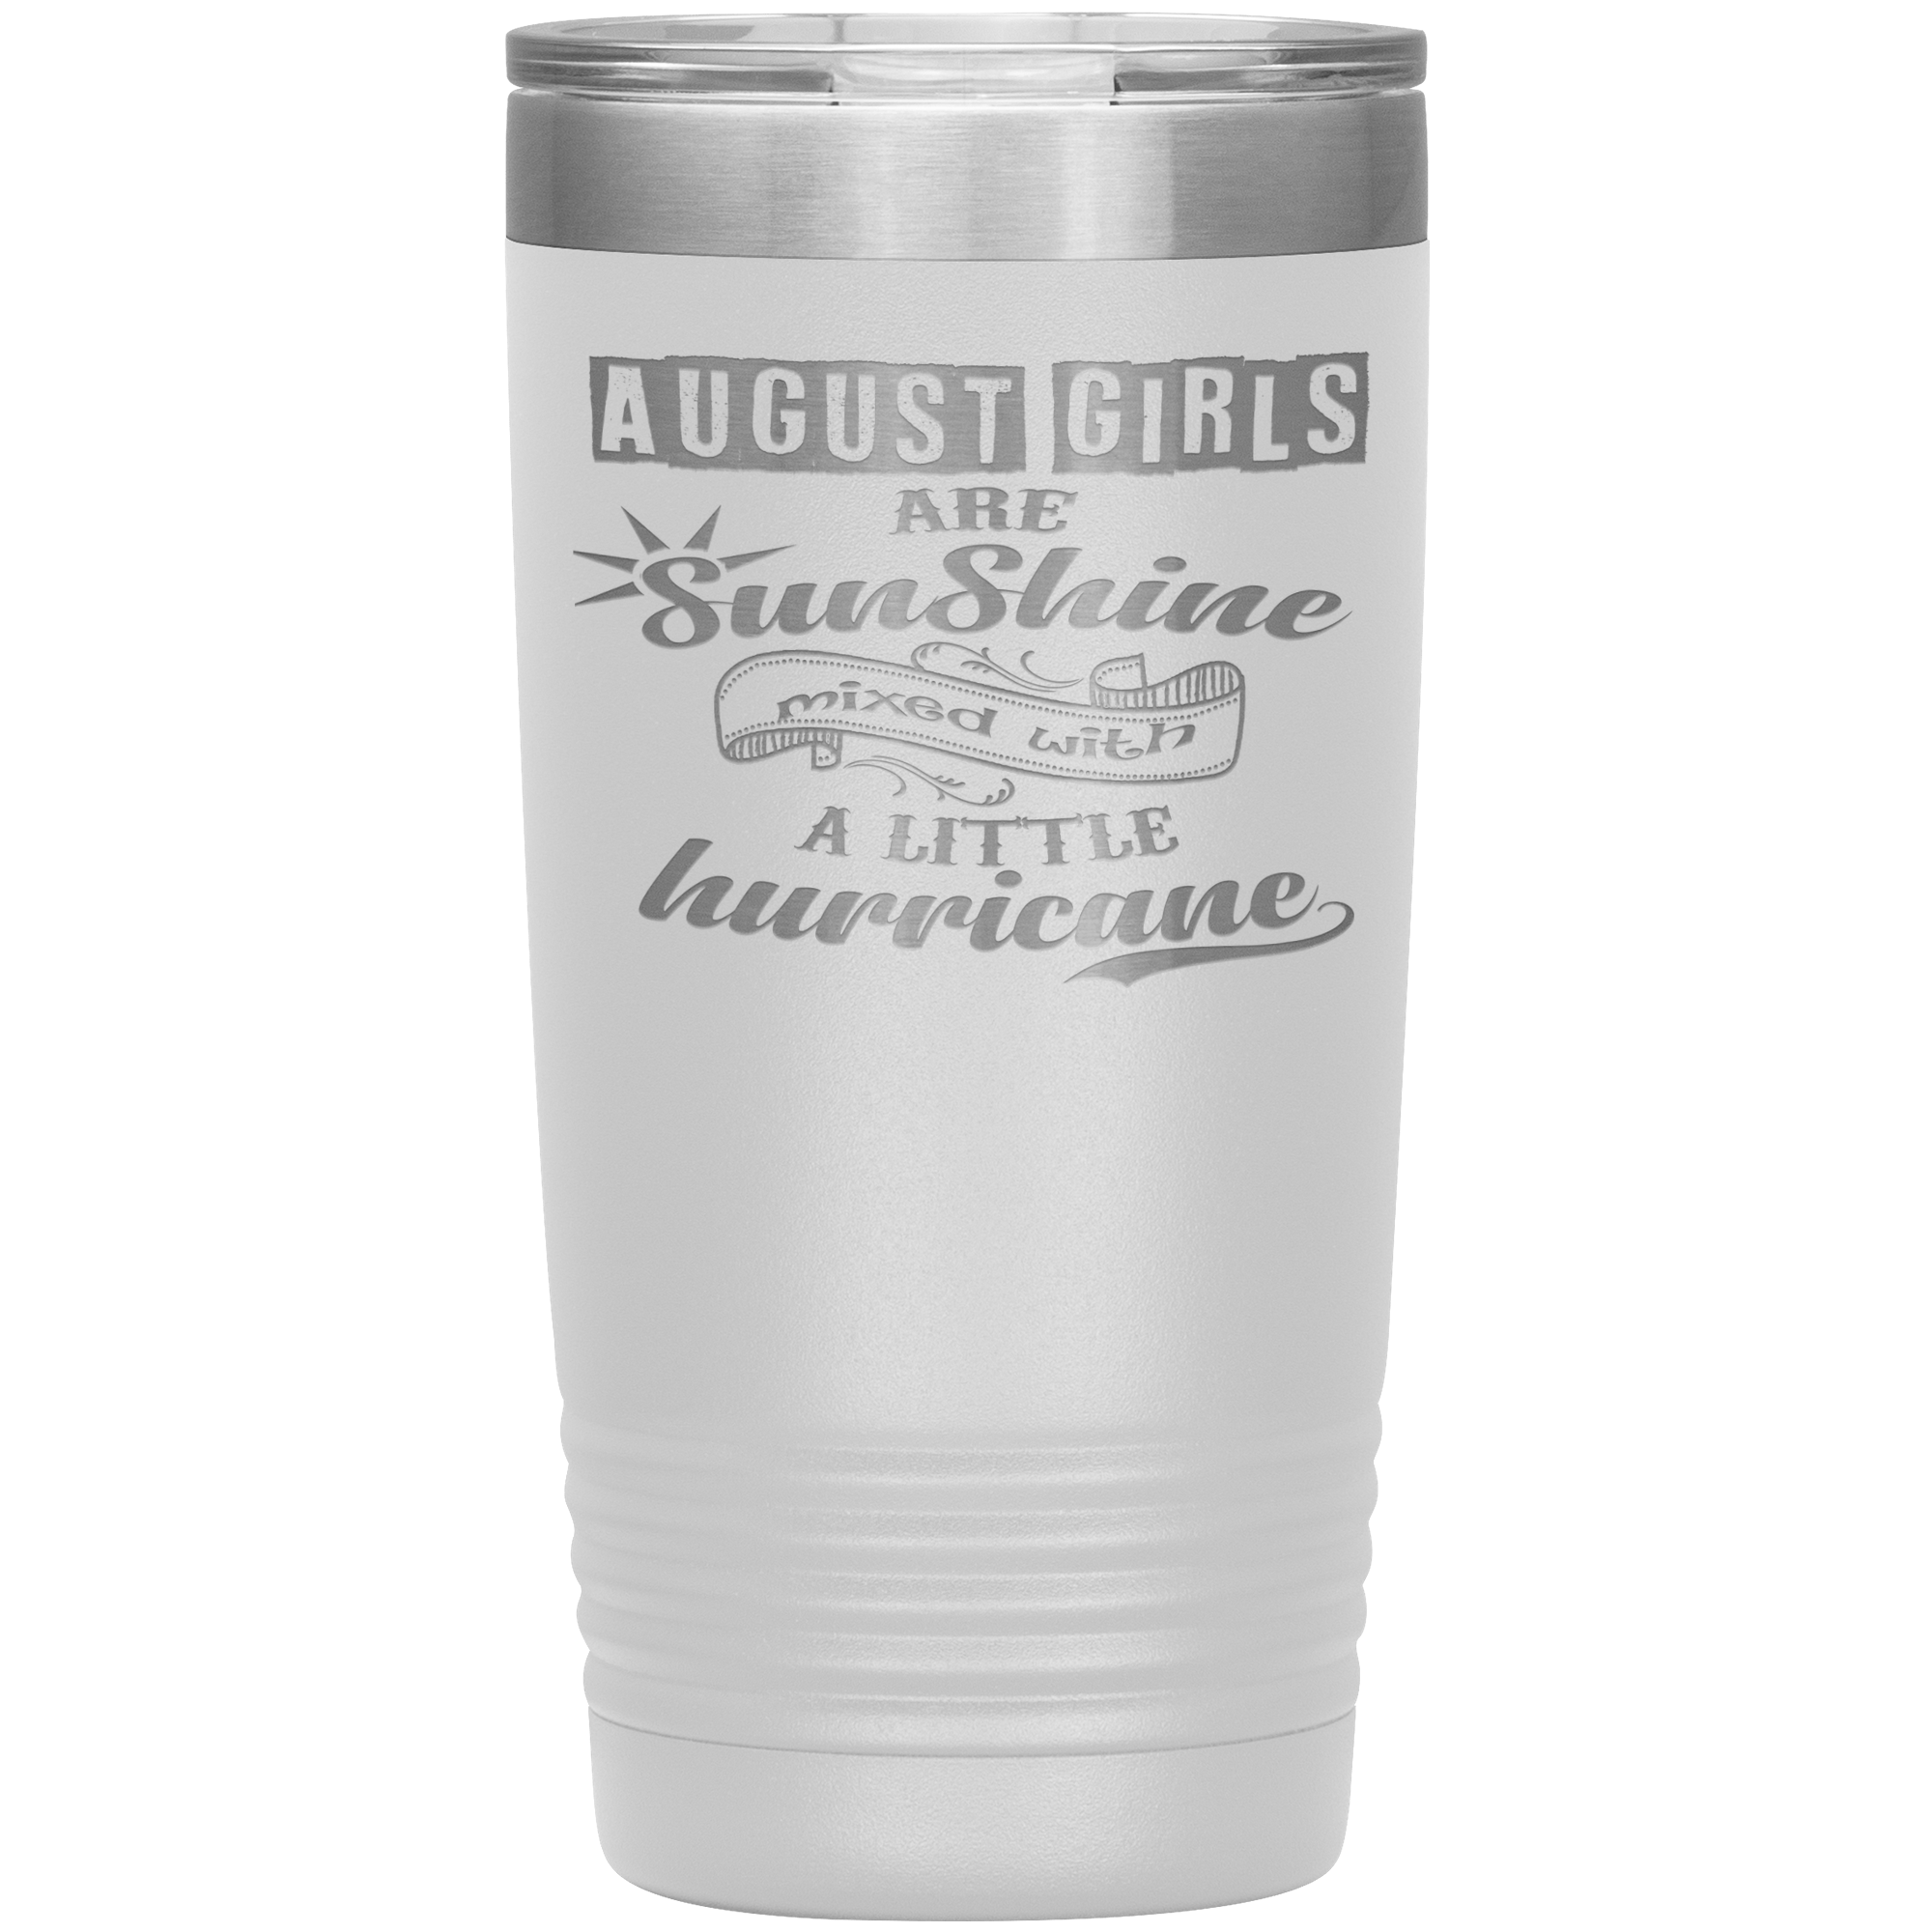 "August Girls are Sunshine Mixed With Little Hurricane" Tumbler